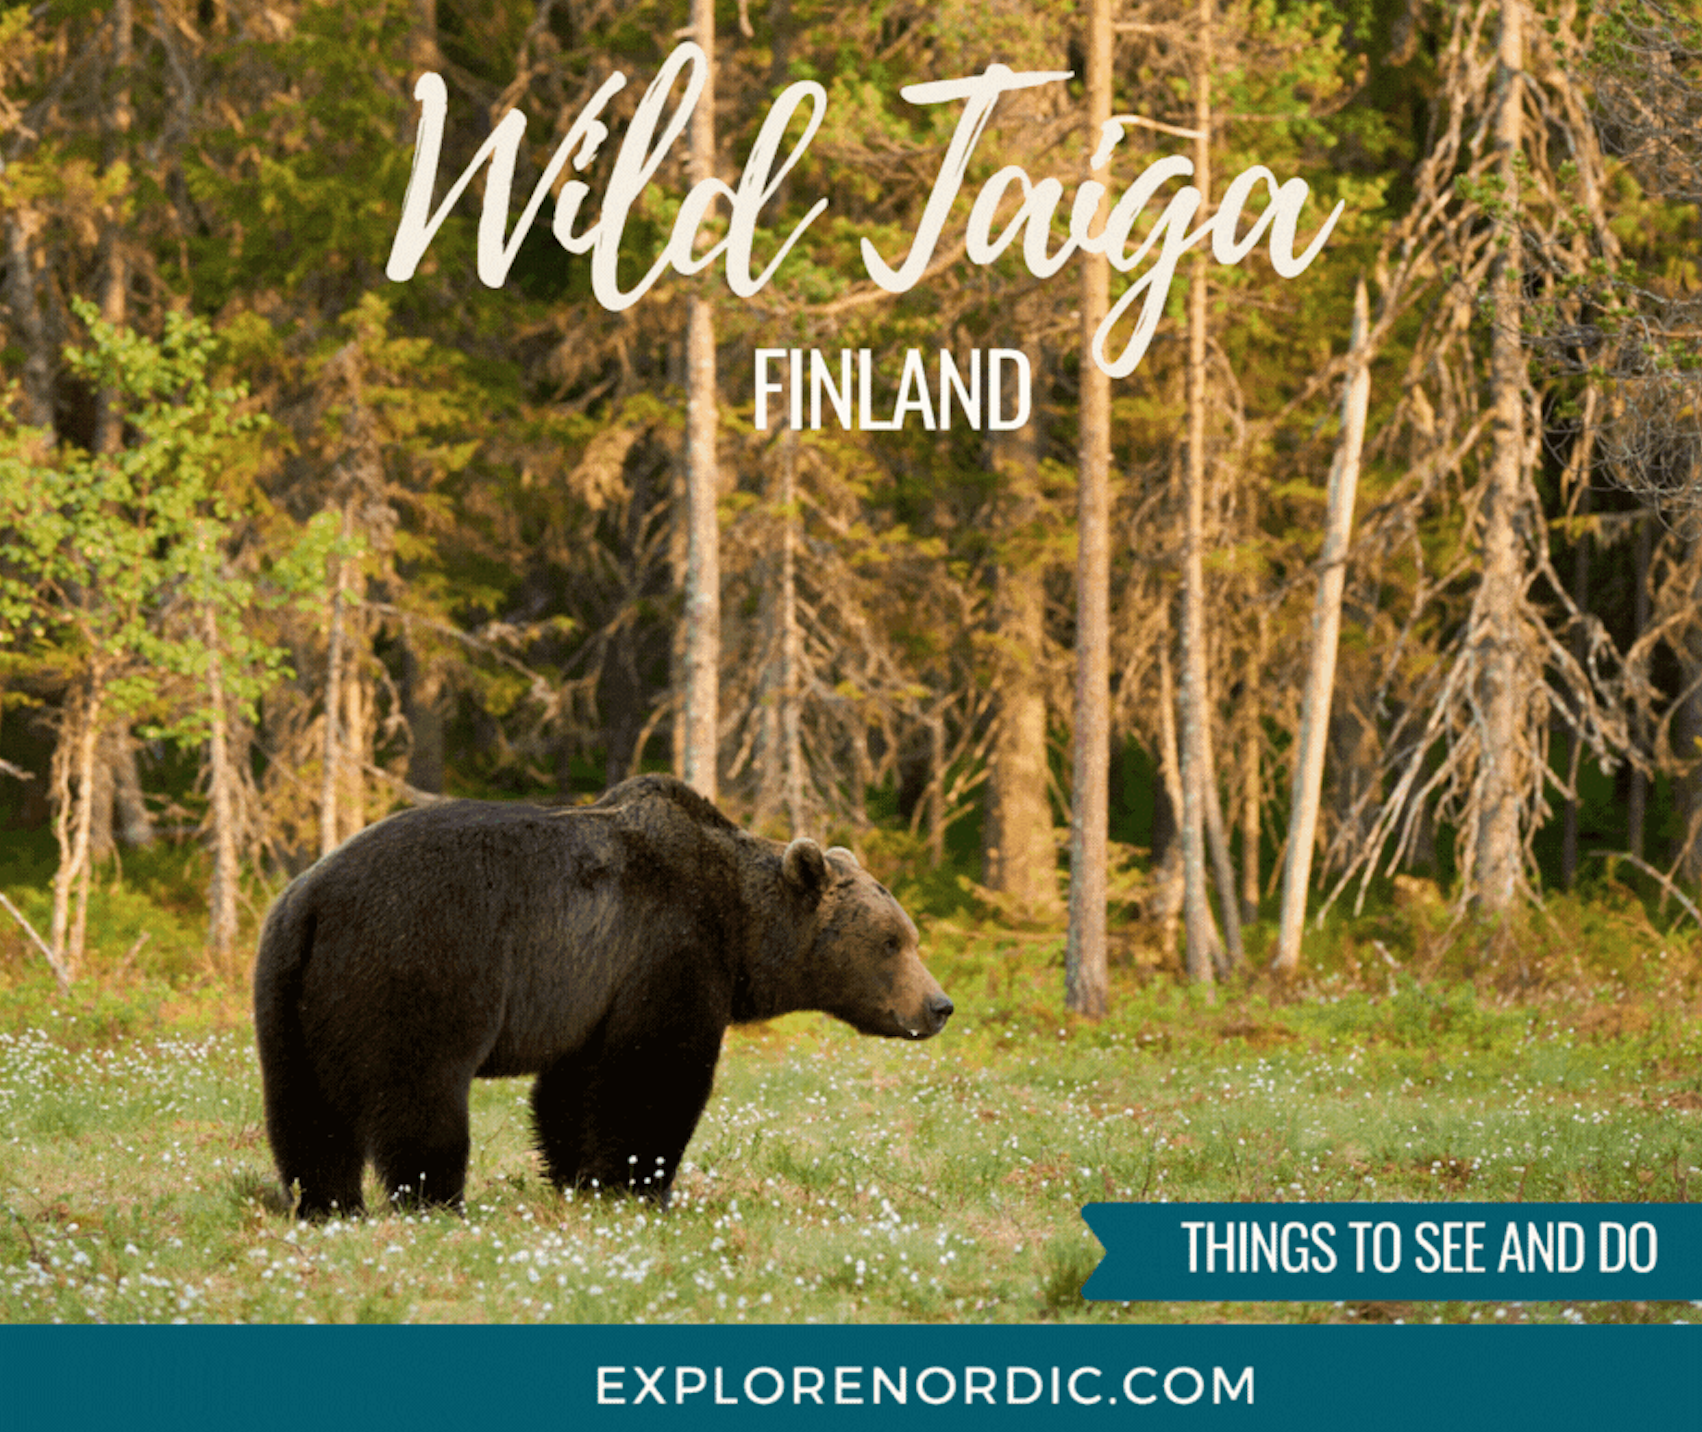 Wild Taiga Finland – Best Things to Do | Explore Nordic